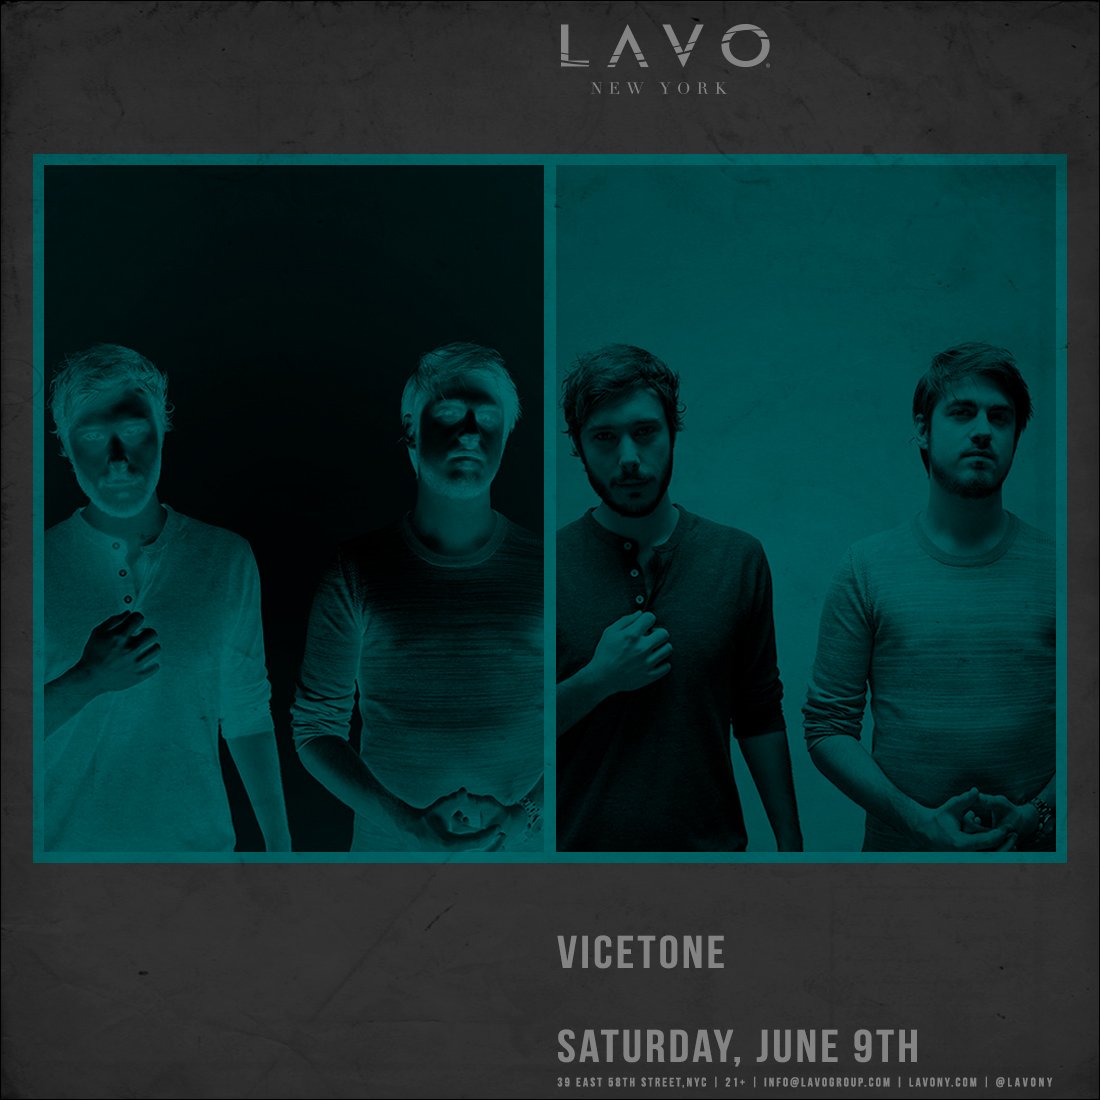 Can't wait to come back to @LavoNY this summer! bit.ly/VTLAVO2018 https://t.co/z2w5lBPQpK